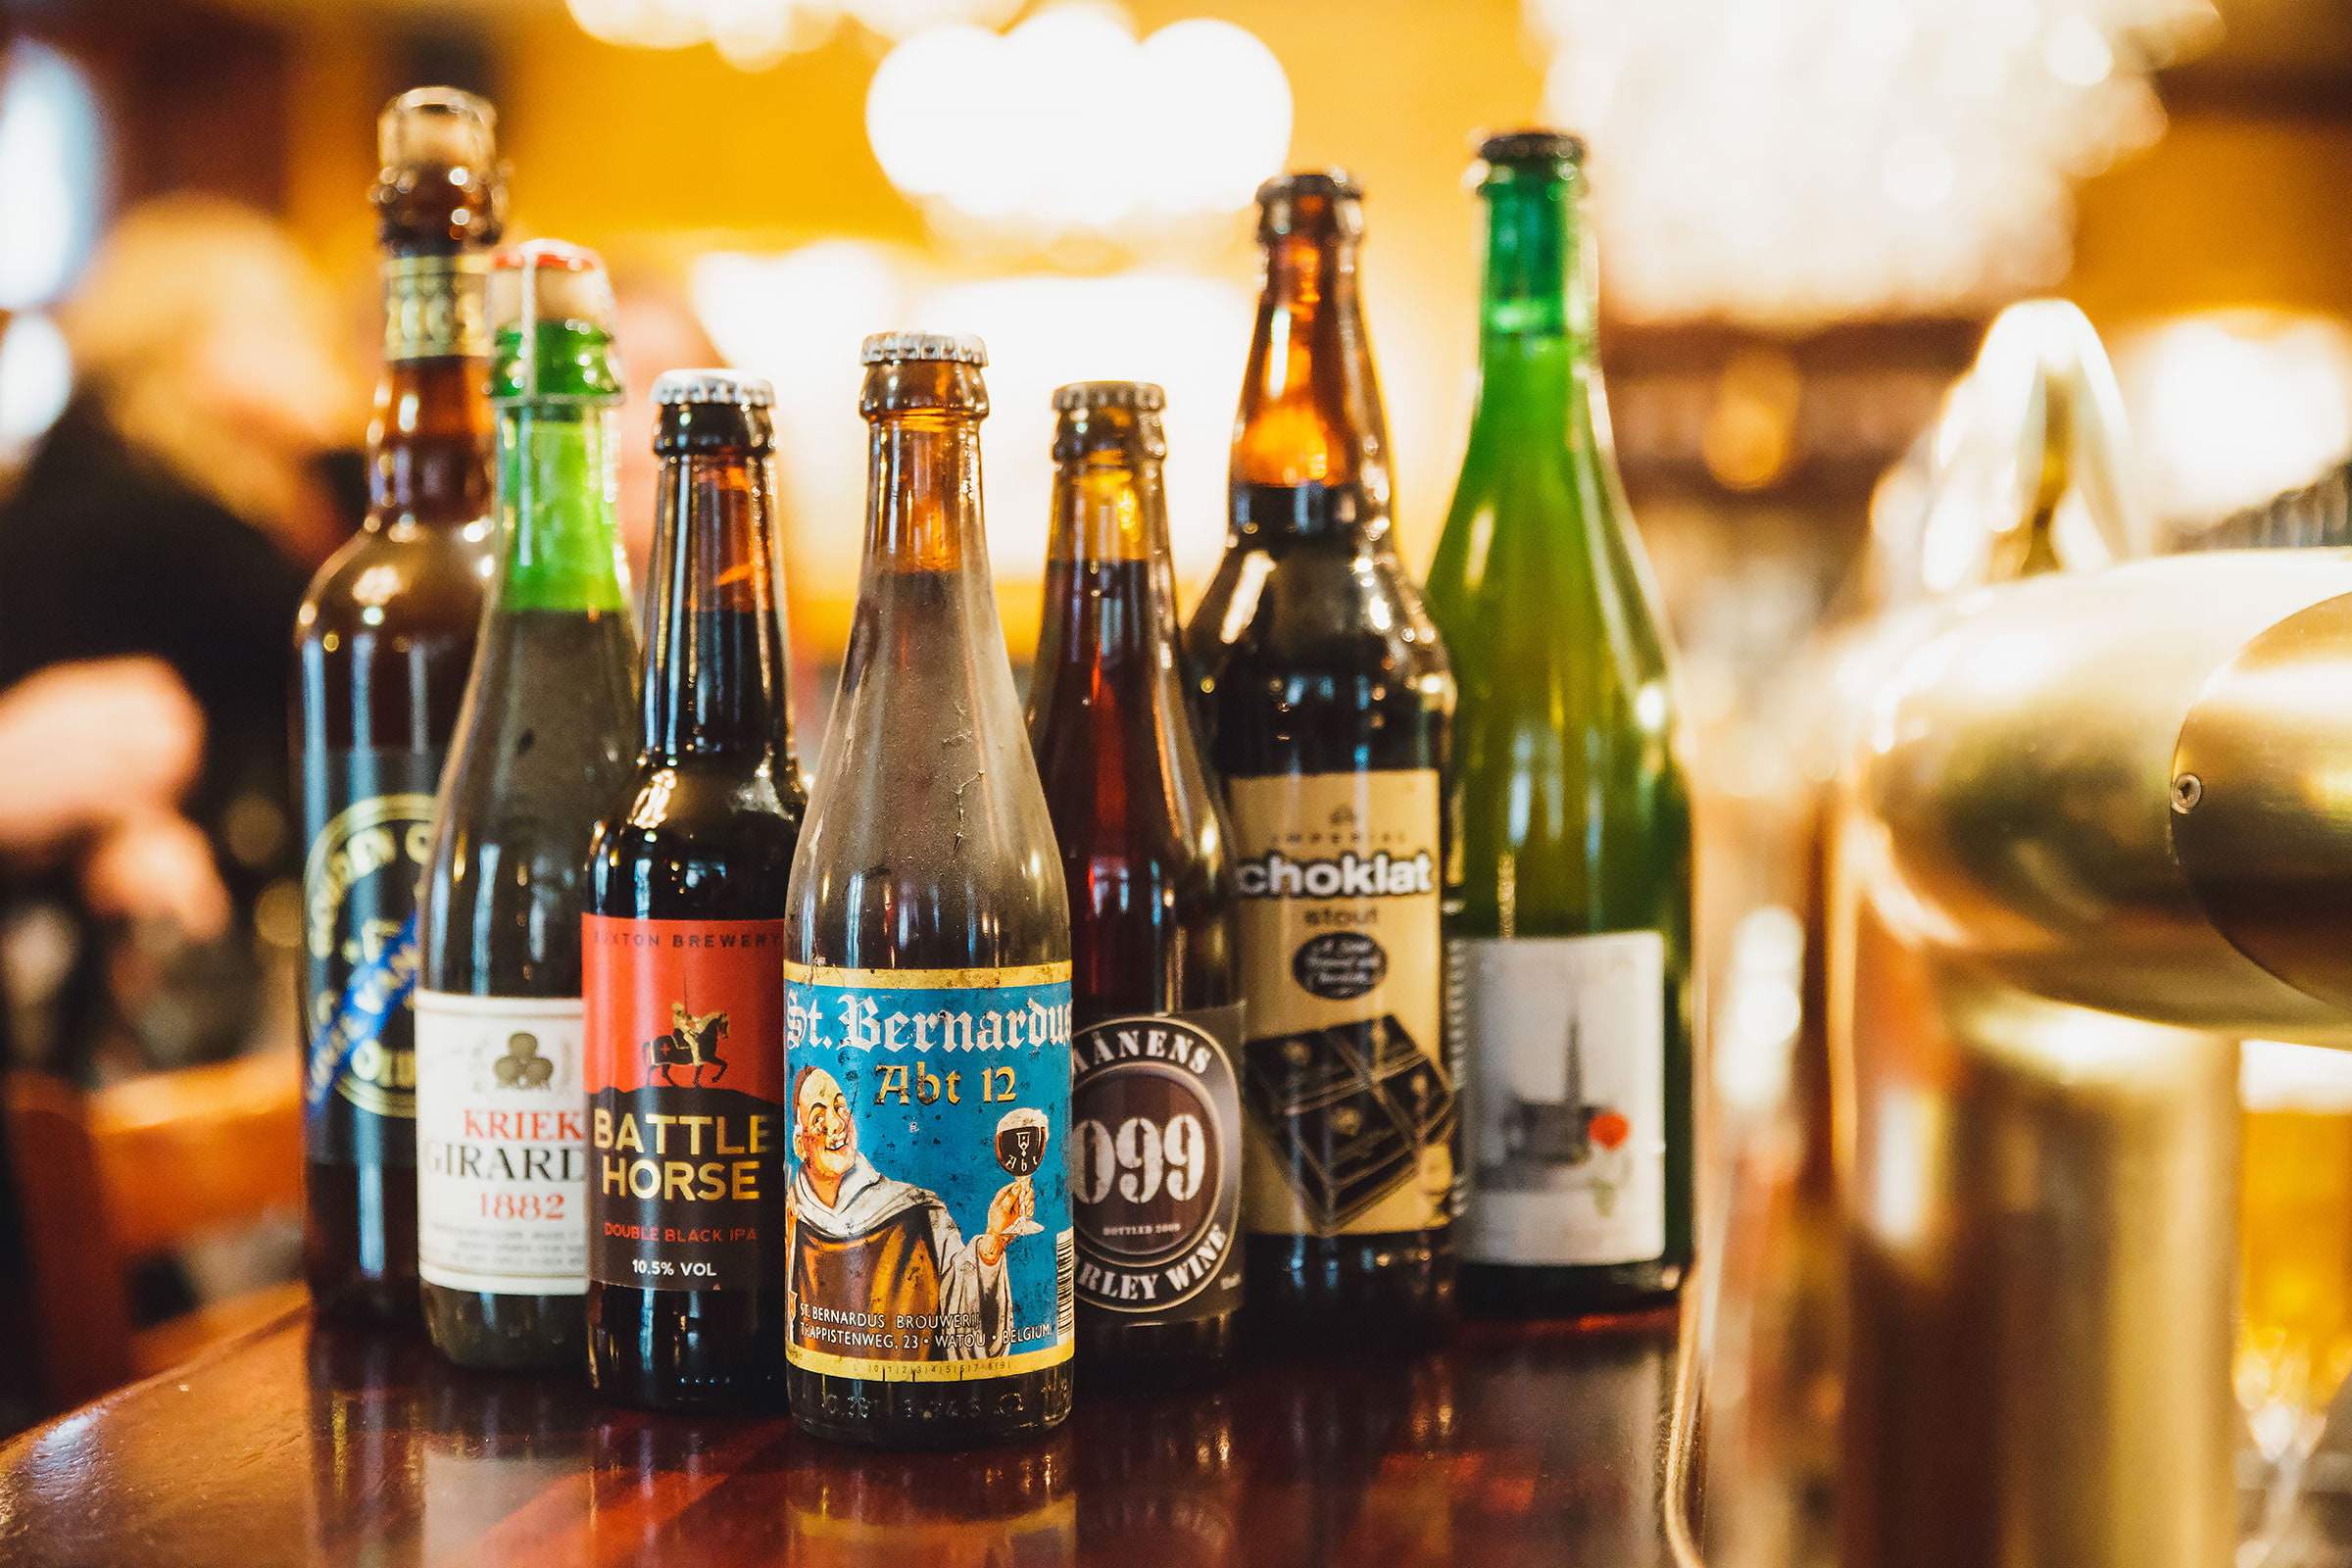 Guide to the best beer bars in London